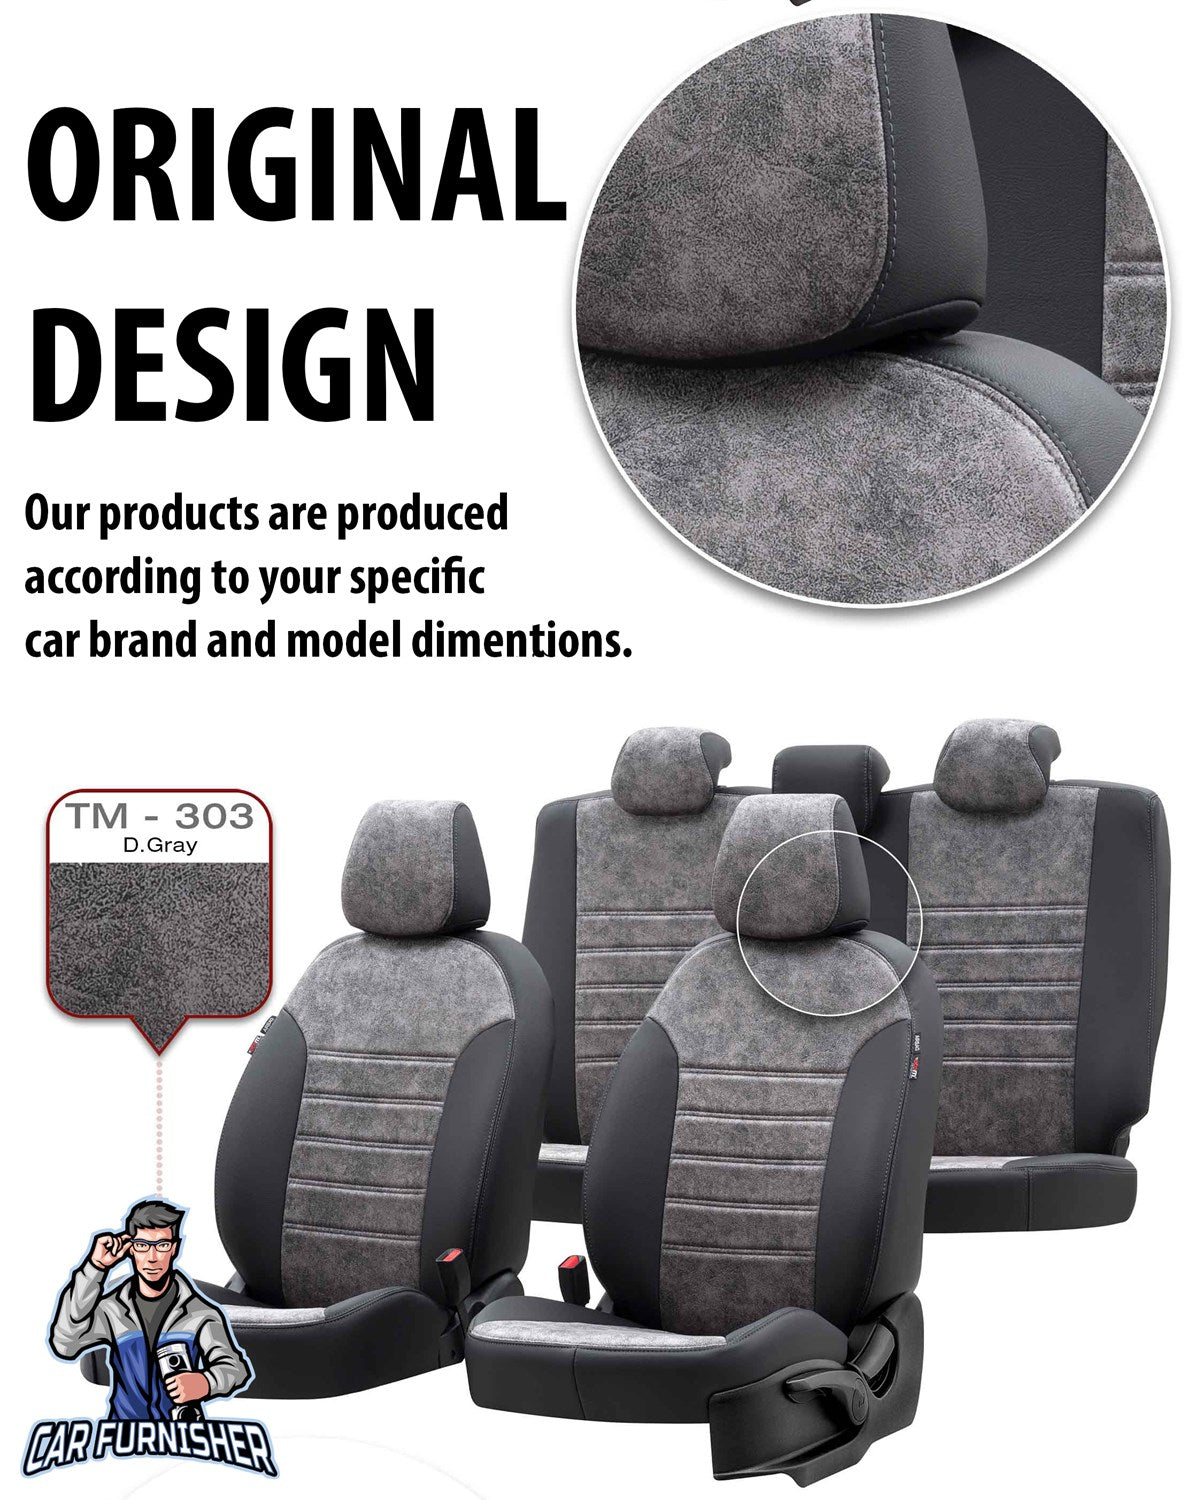 Peugeot Boxer Seat Covers Milano Suede Design Smoked Black Leather & Suede Fabric